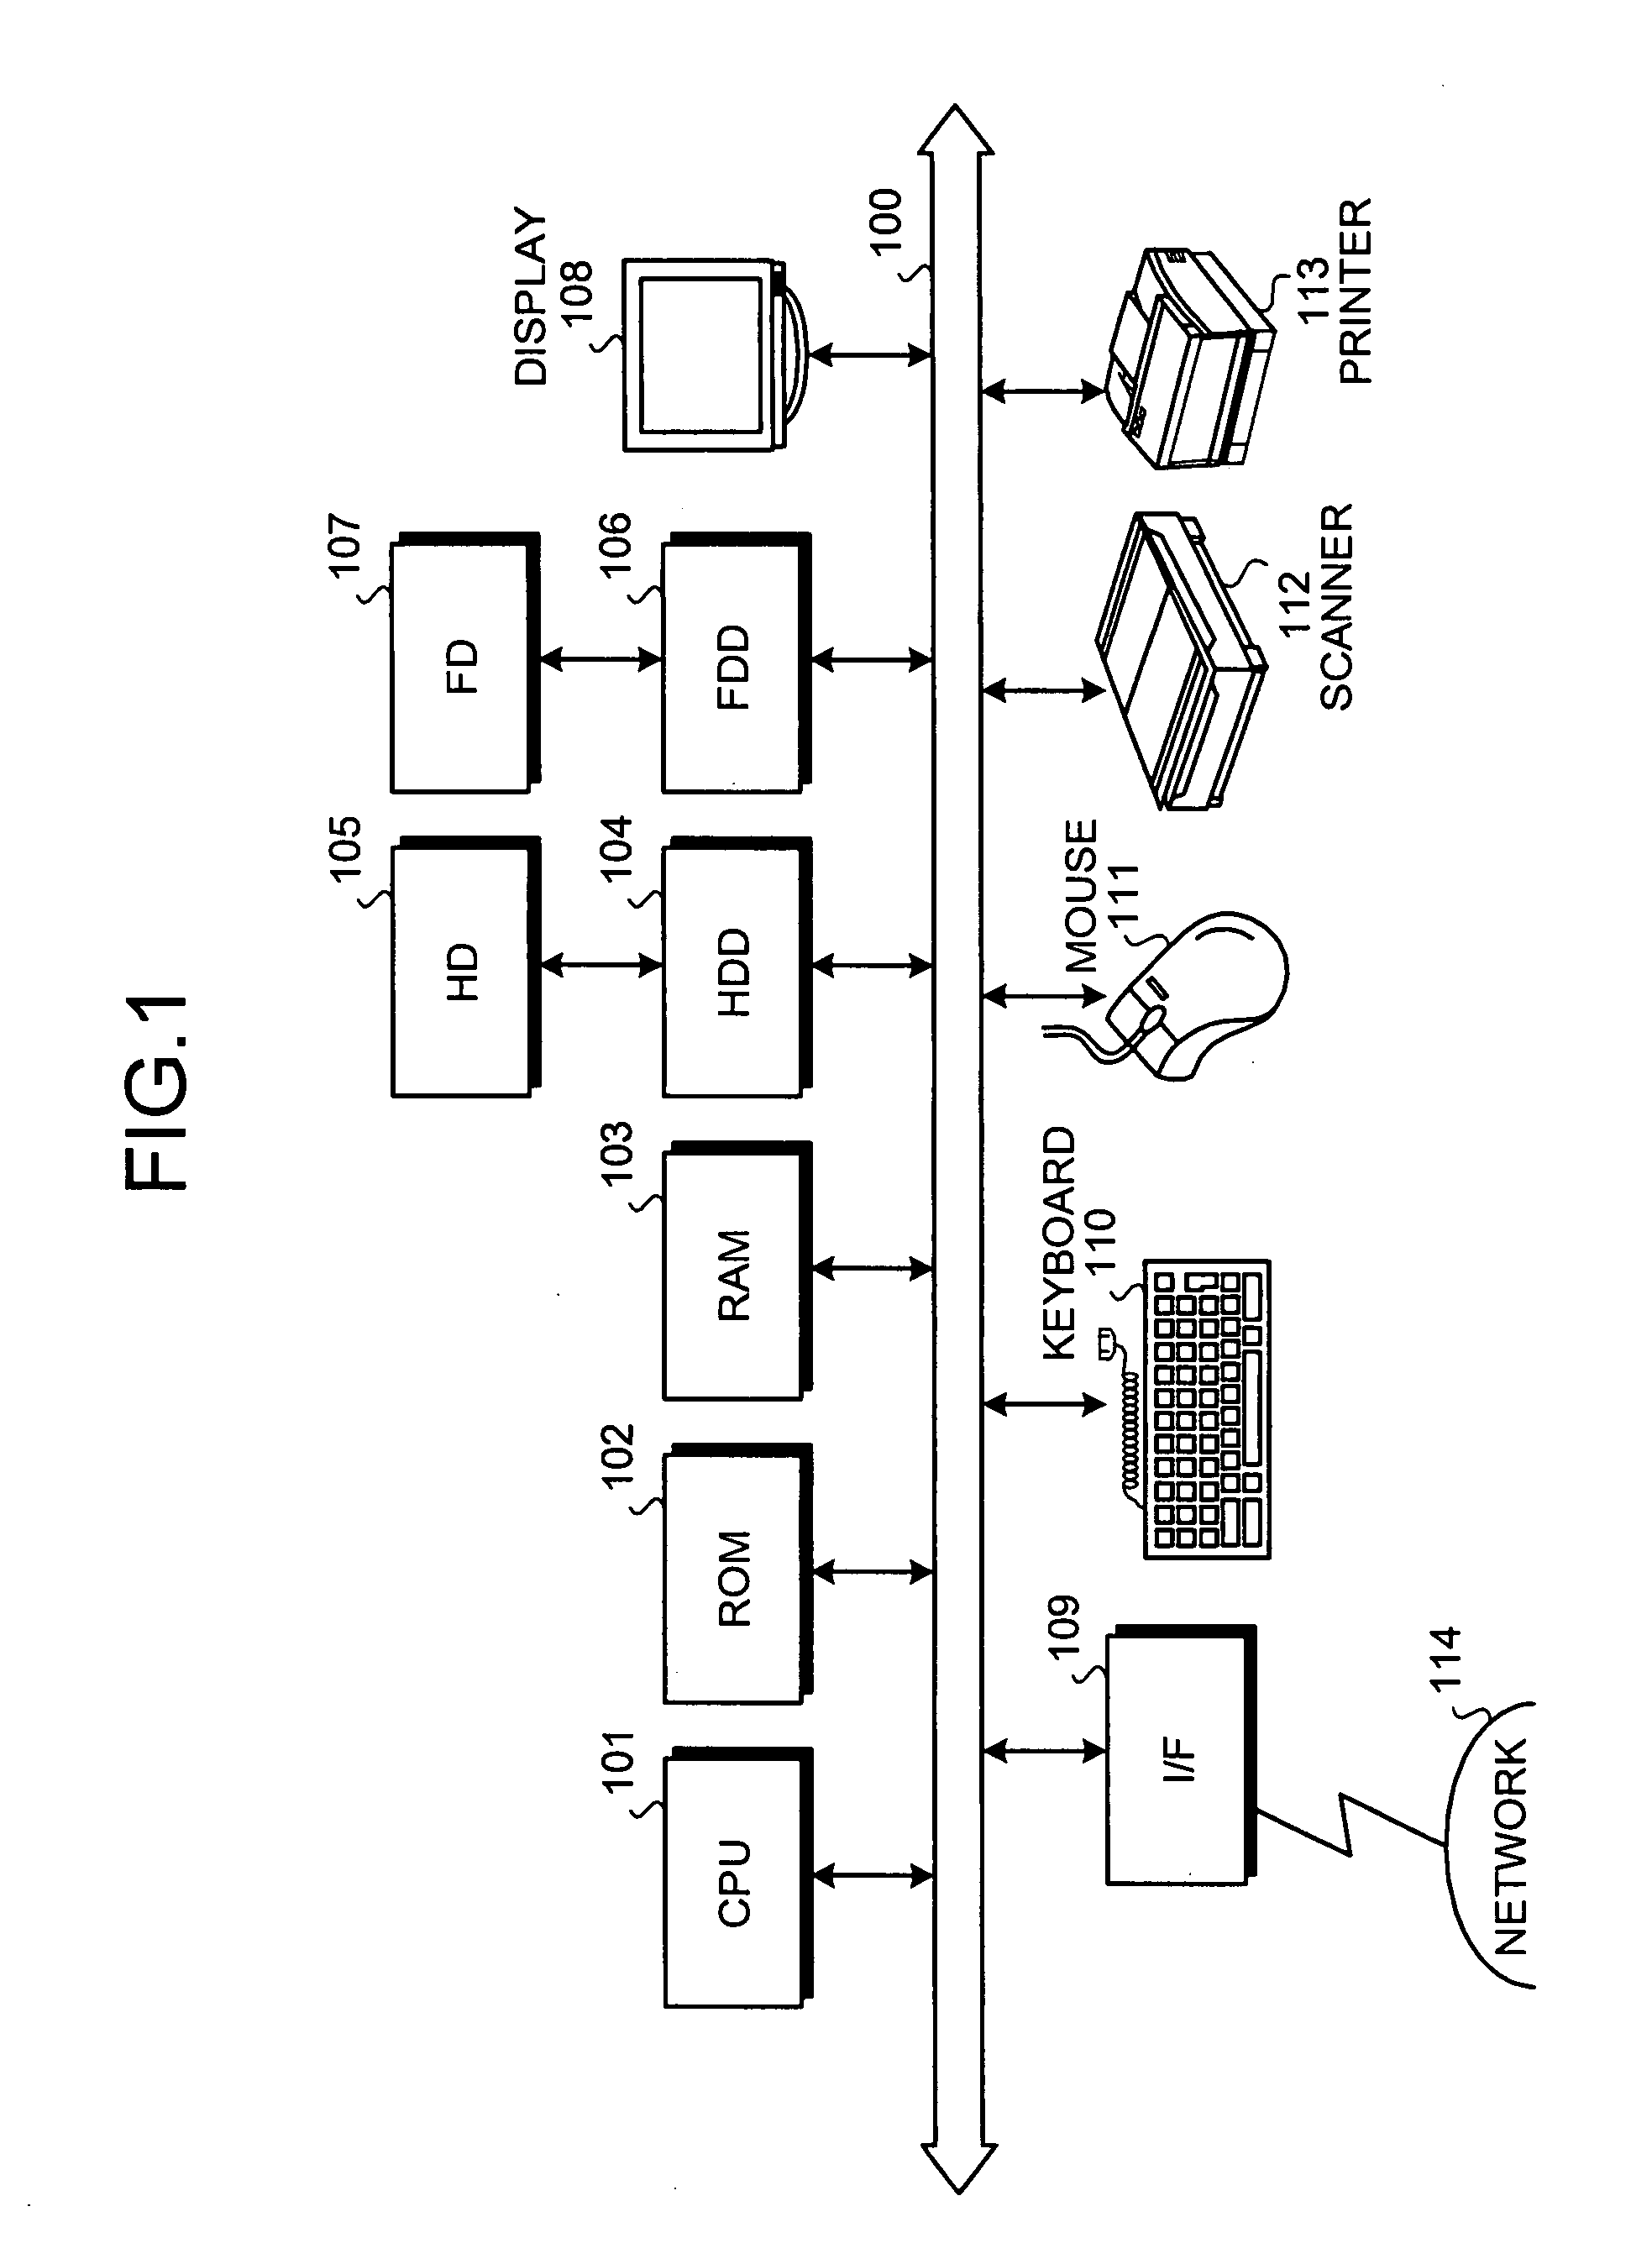 Computer product for supporting design and verification of integrated circuit